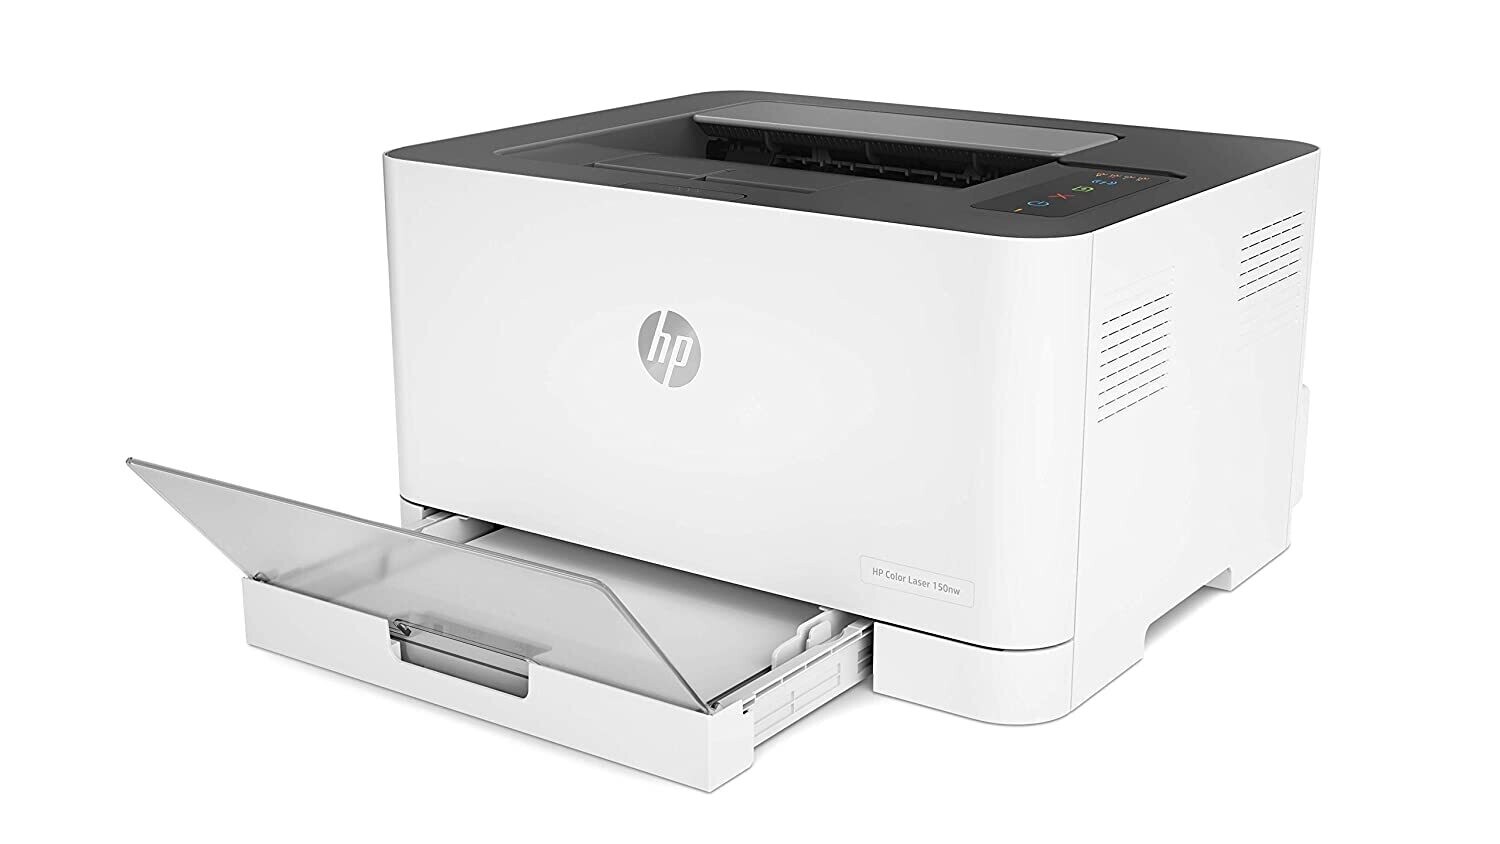 HP 150nw Single Function Color Laser Printer